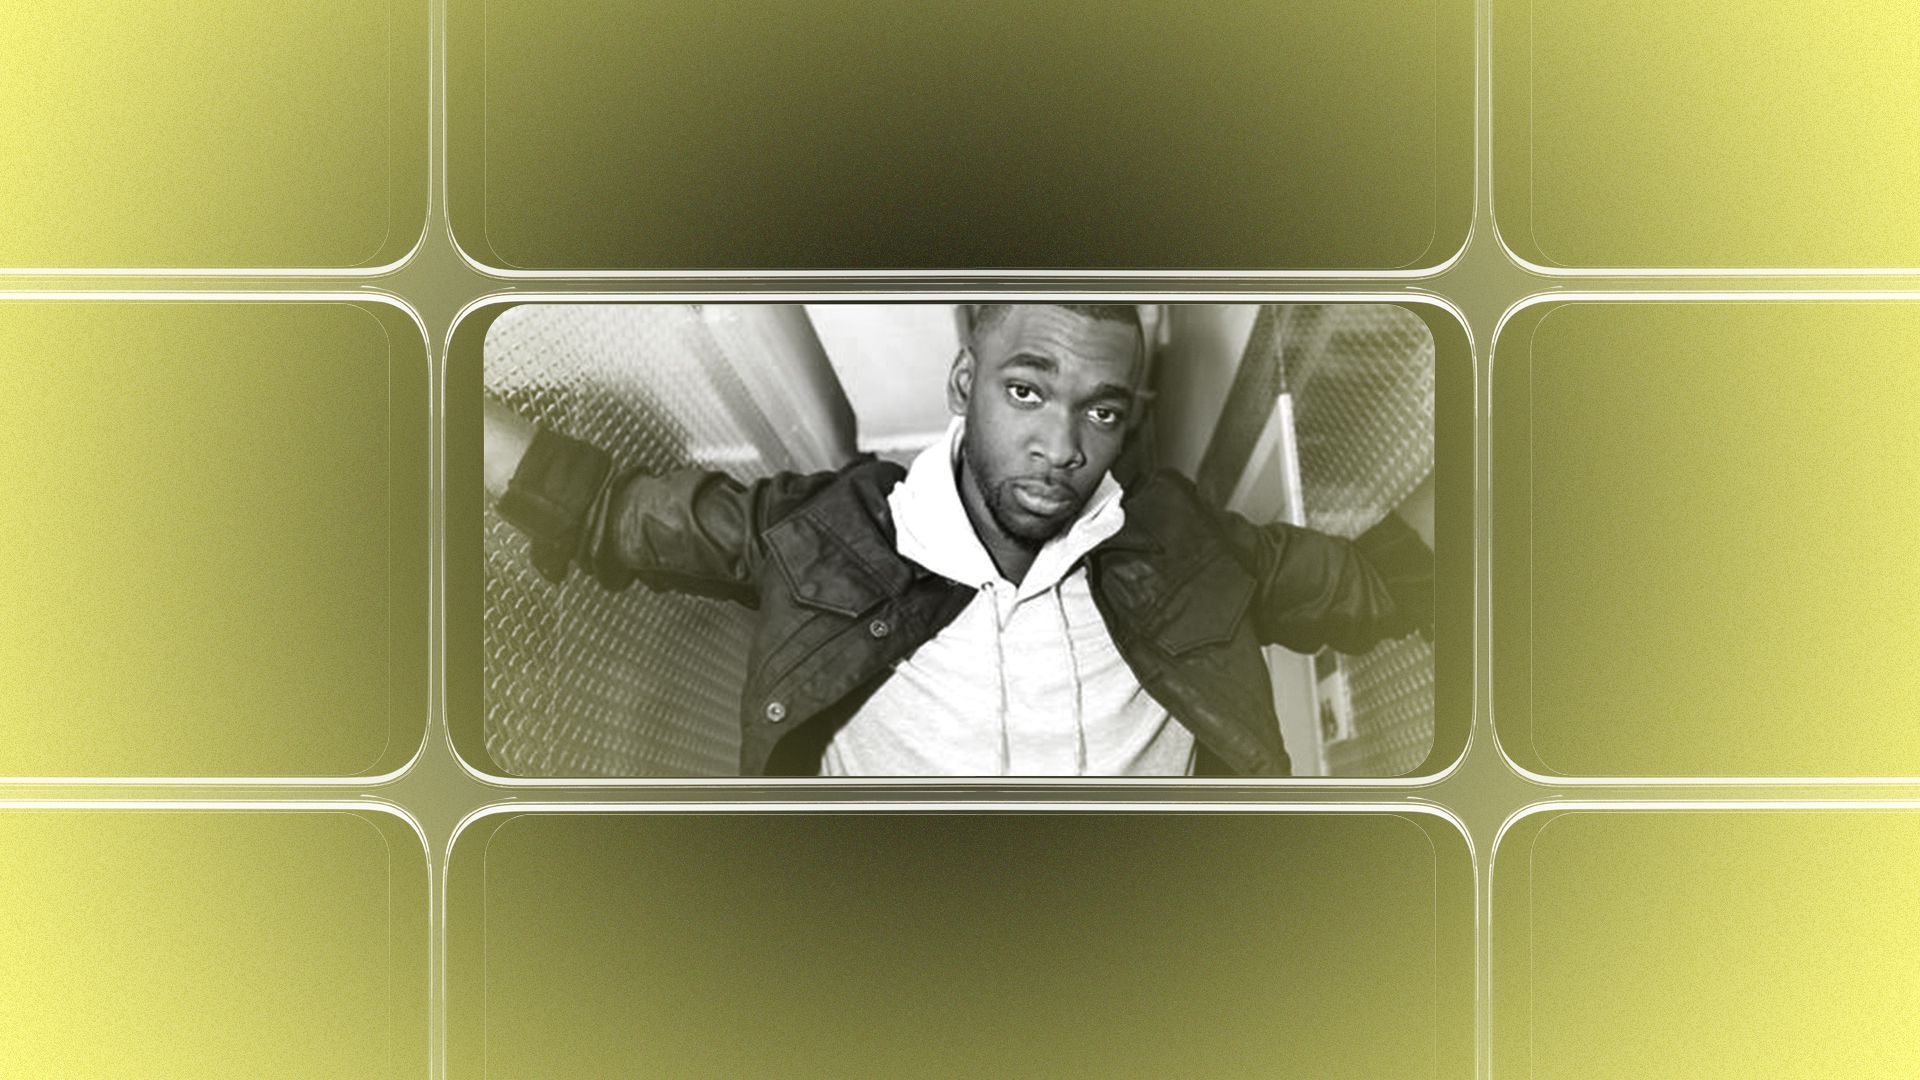 Photo illustration of a grid of smartphone screens, the center one showing an image of Jay Pharoah.